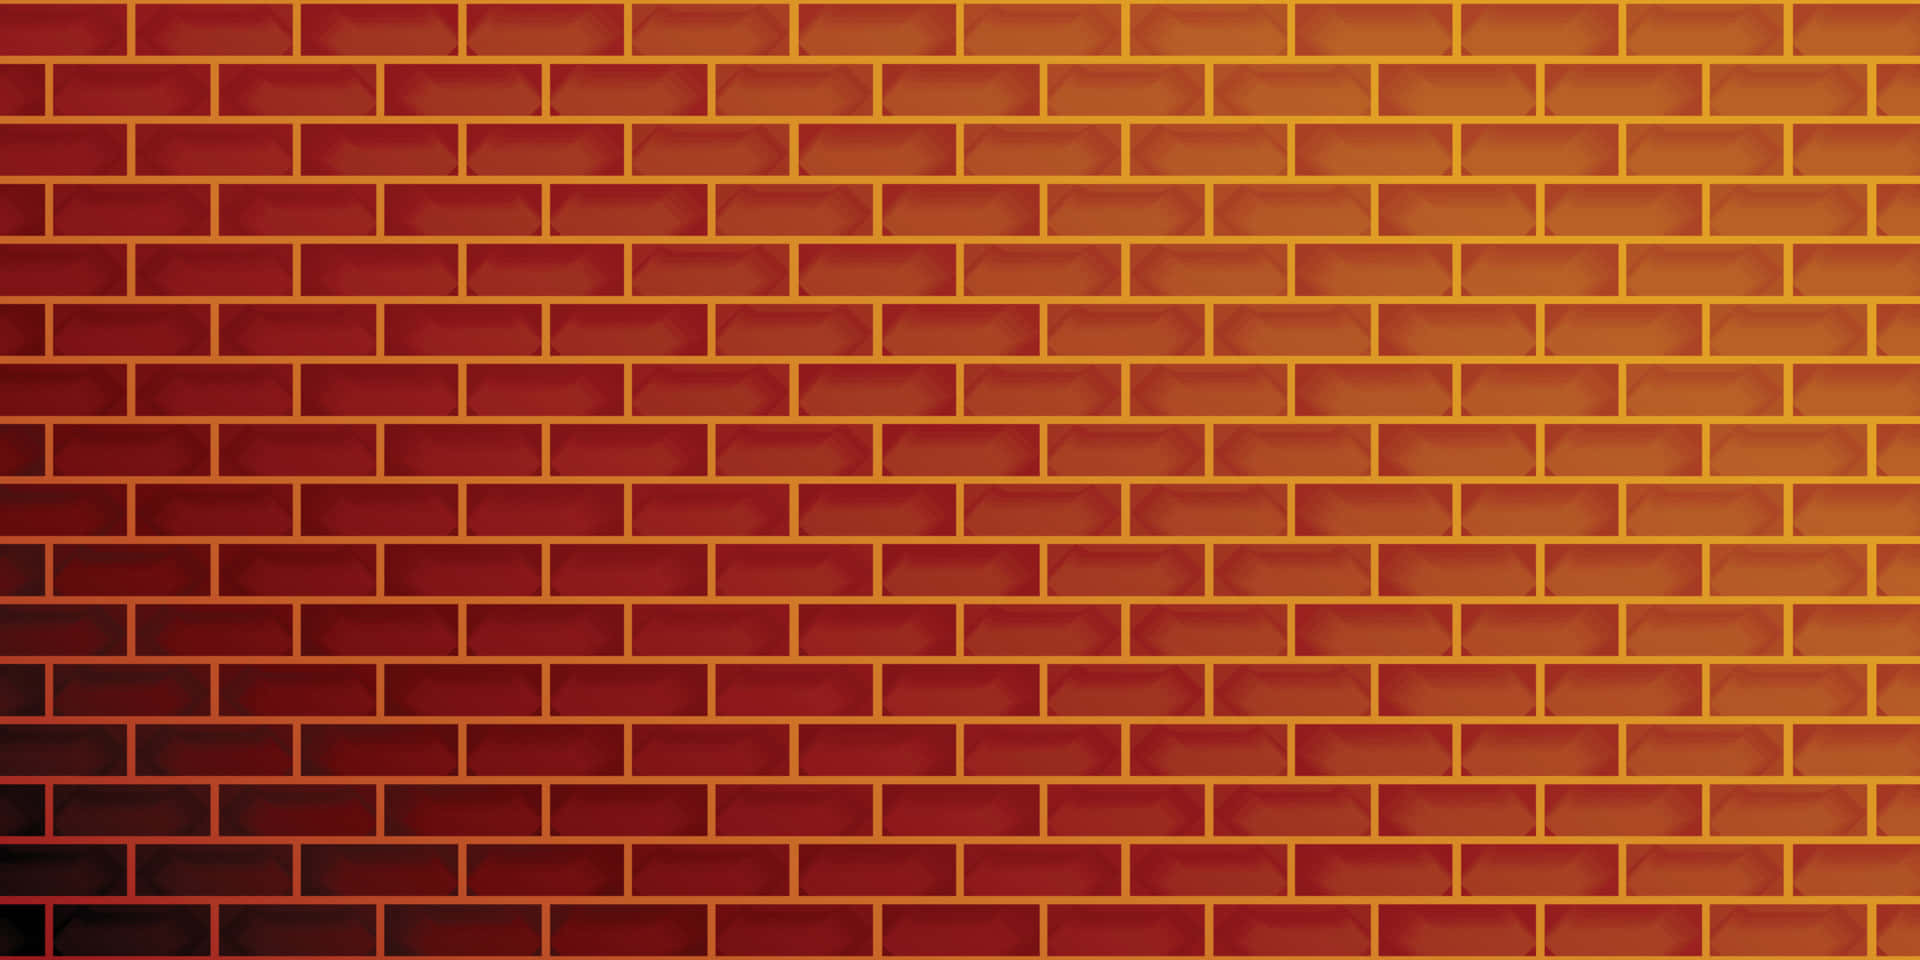 Neat And Clean Brisk Wall Wallpaper